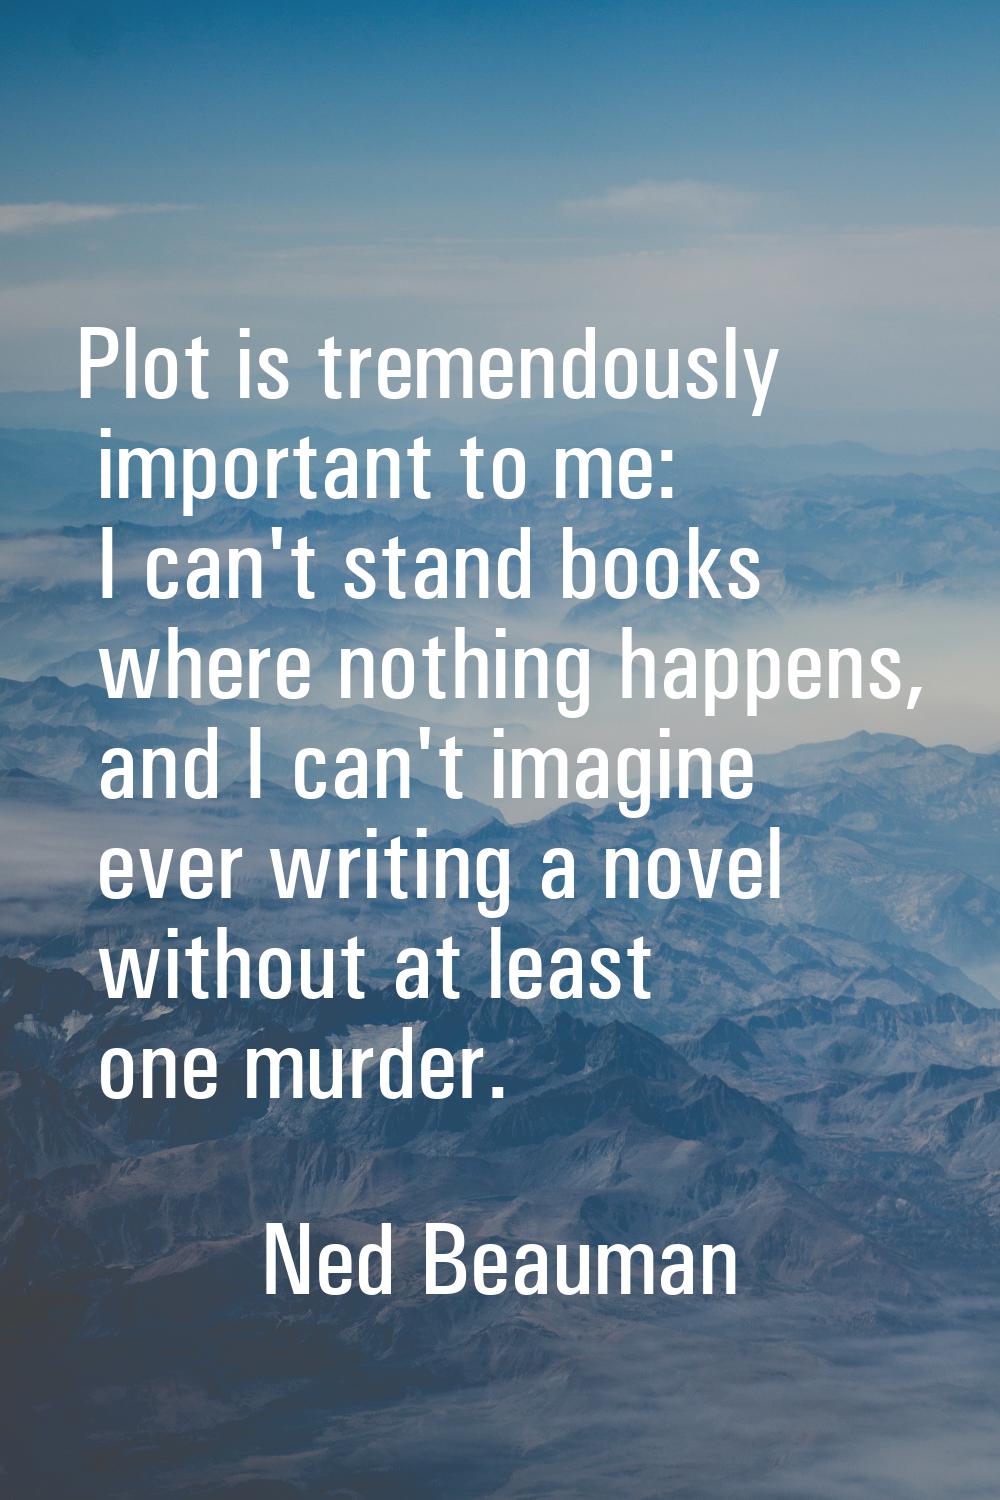 Plot is tremendously important to me: I can't stand books where nothing happens, and I can't imagin